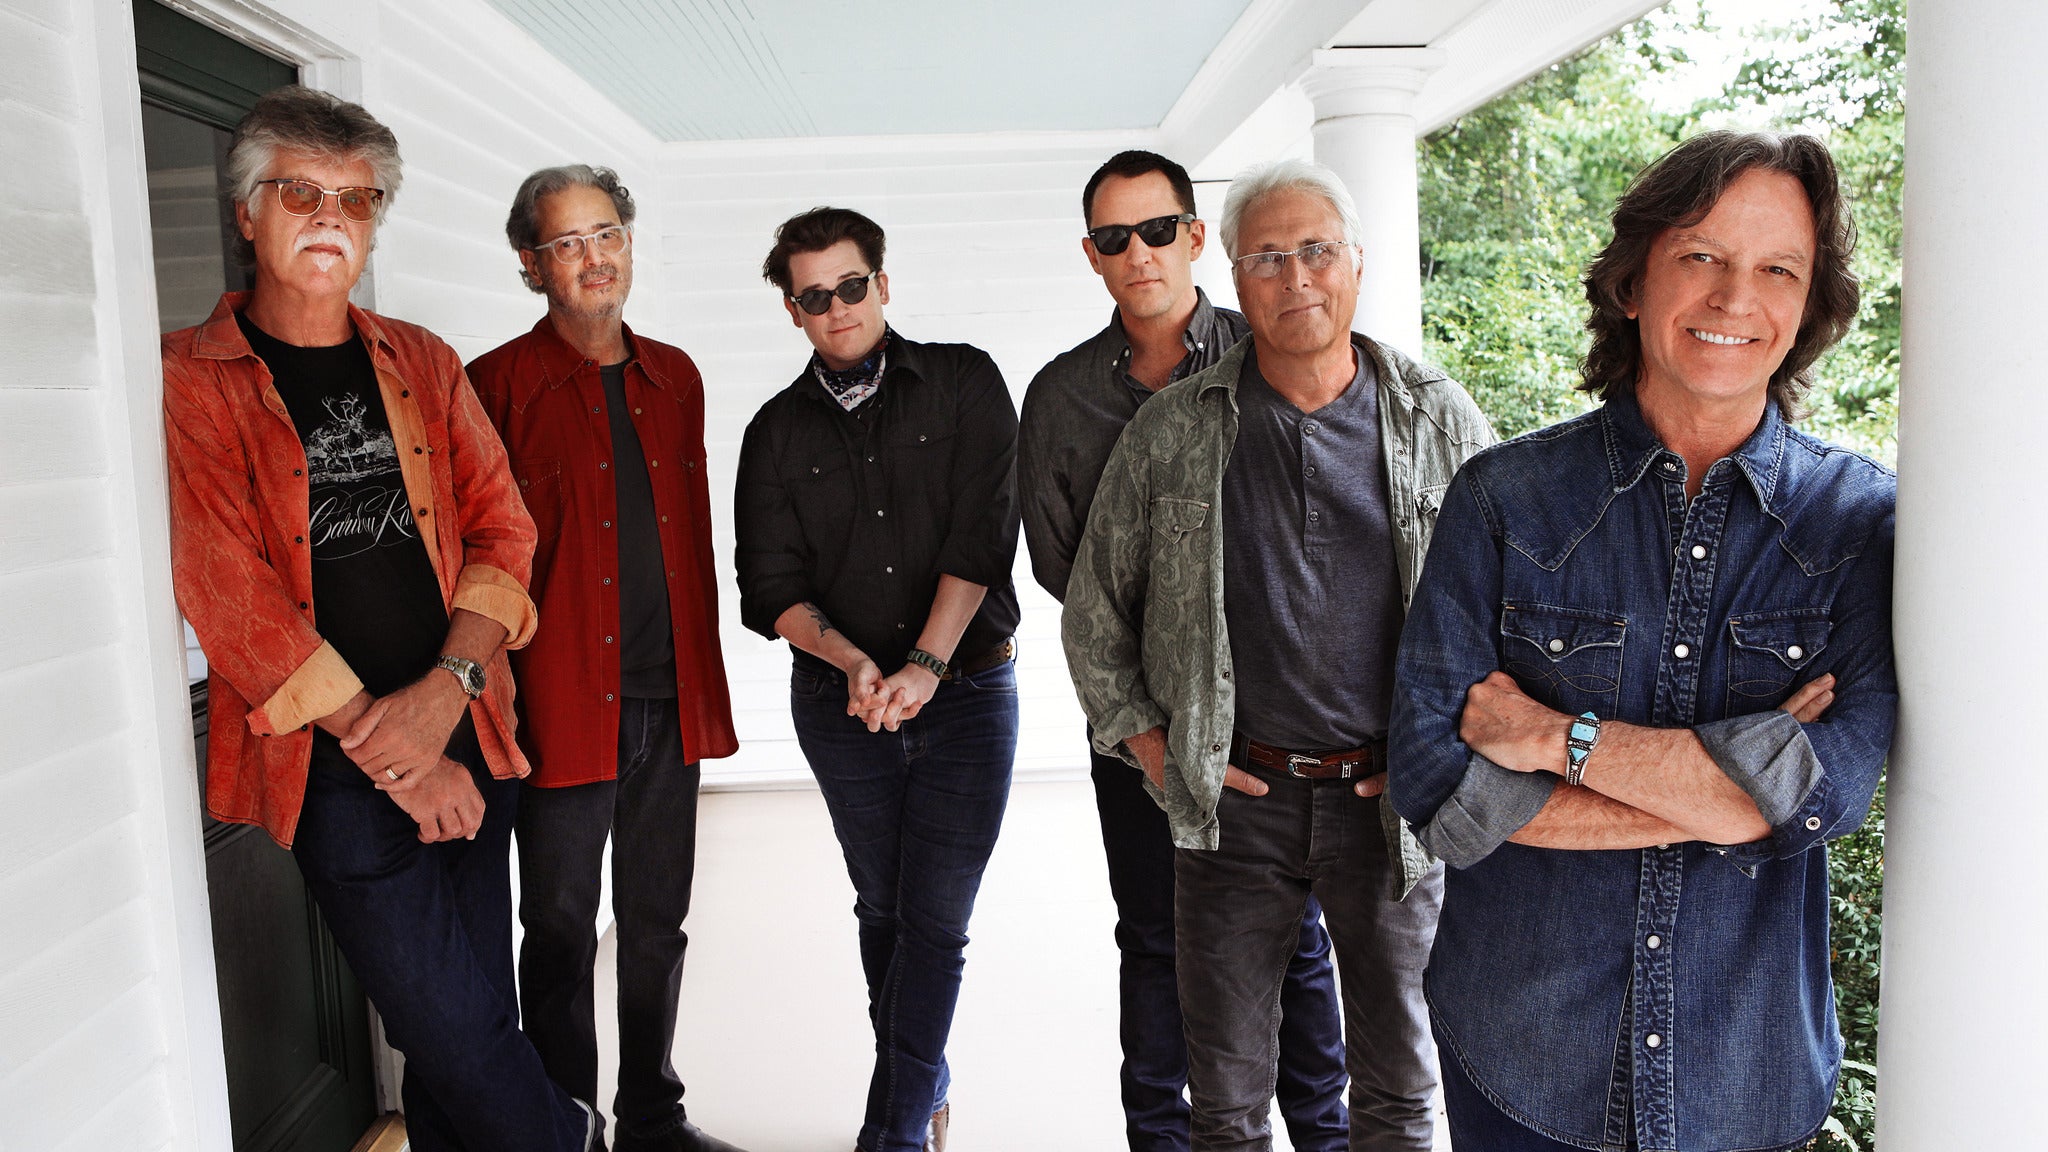 Nitty Gritty Dirt Band in Chattanooga promo photo for Official Platinum presale offer code